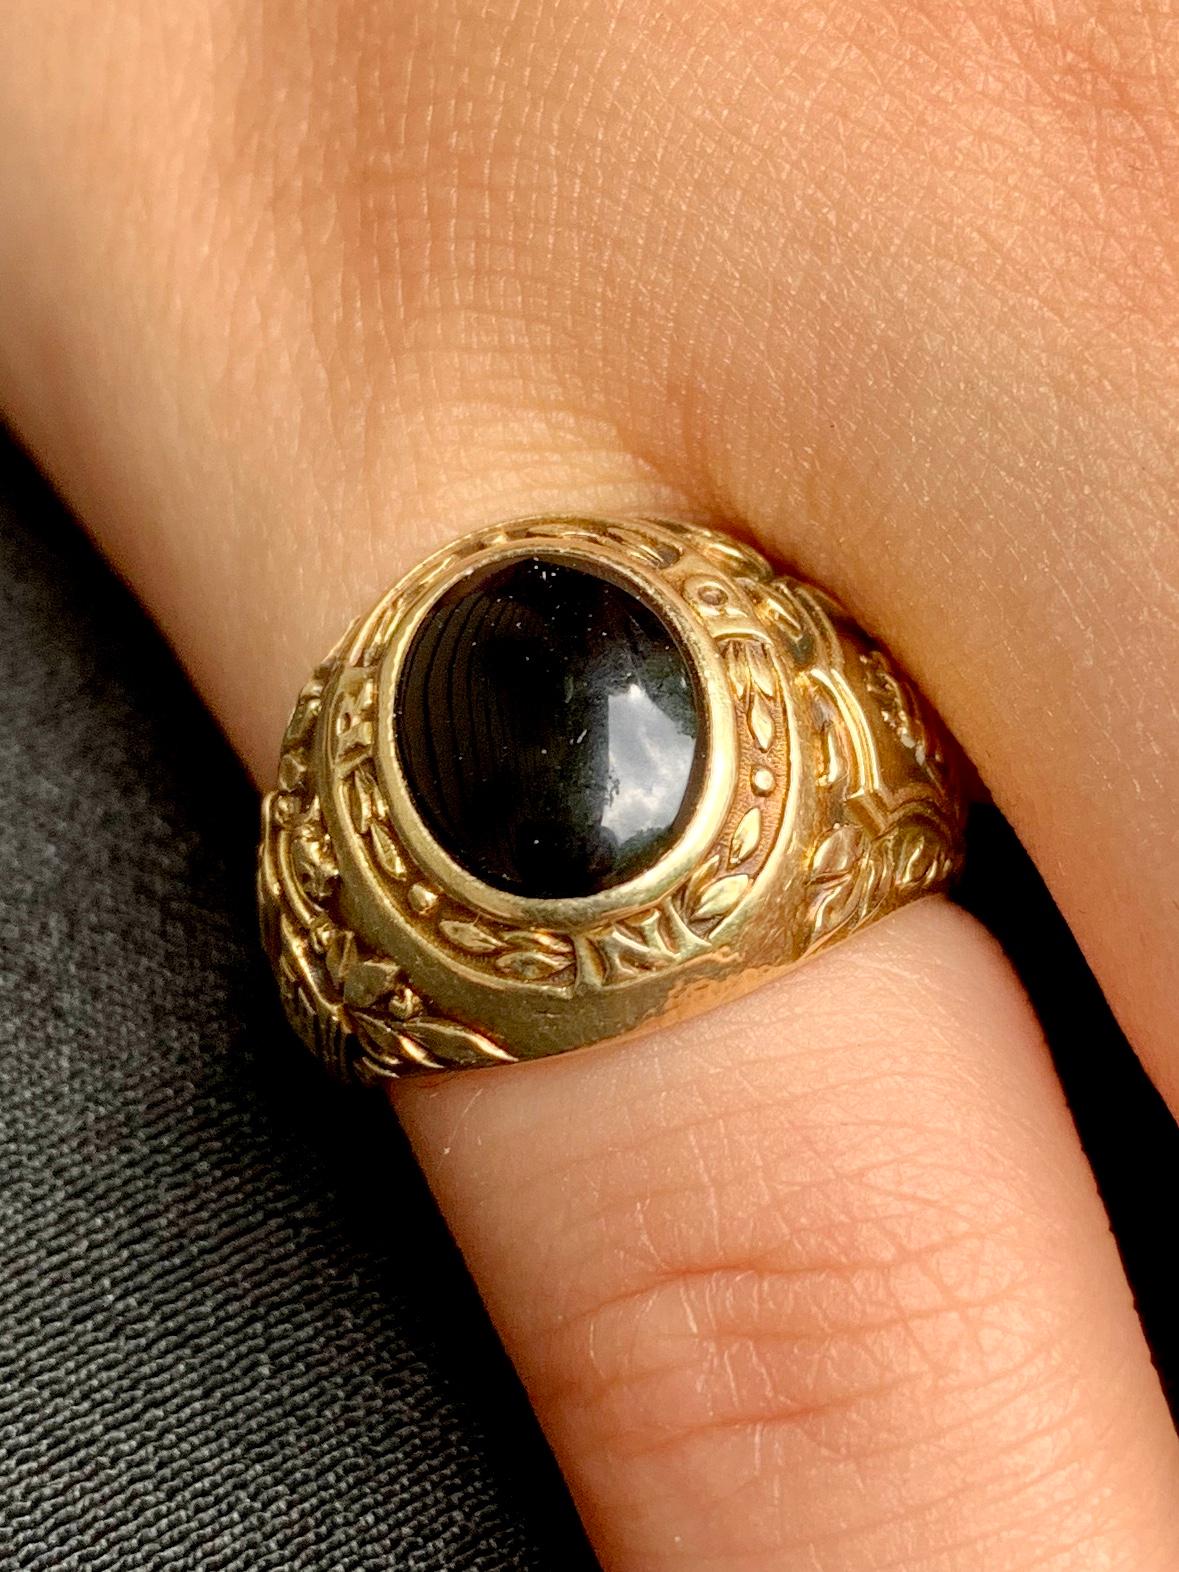  Vintage Tiffany & Co. 14K gold and cabochon onyx signet ring. Elaborately decorated with a three mast ship within a heraldic crest surrounded by laurel leaves on one side and a large open book with the date 1938 resting upon two crossed laurel